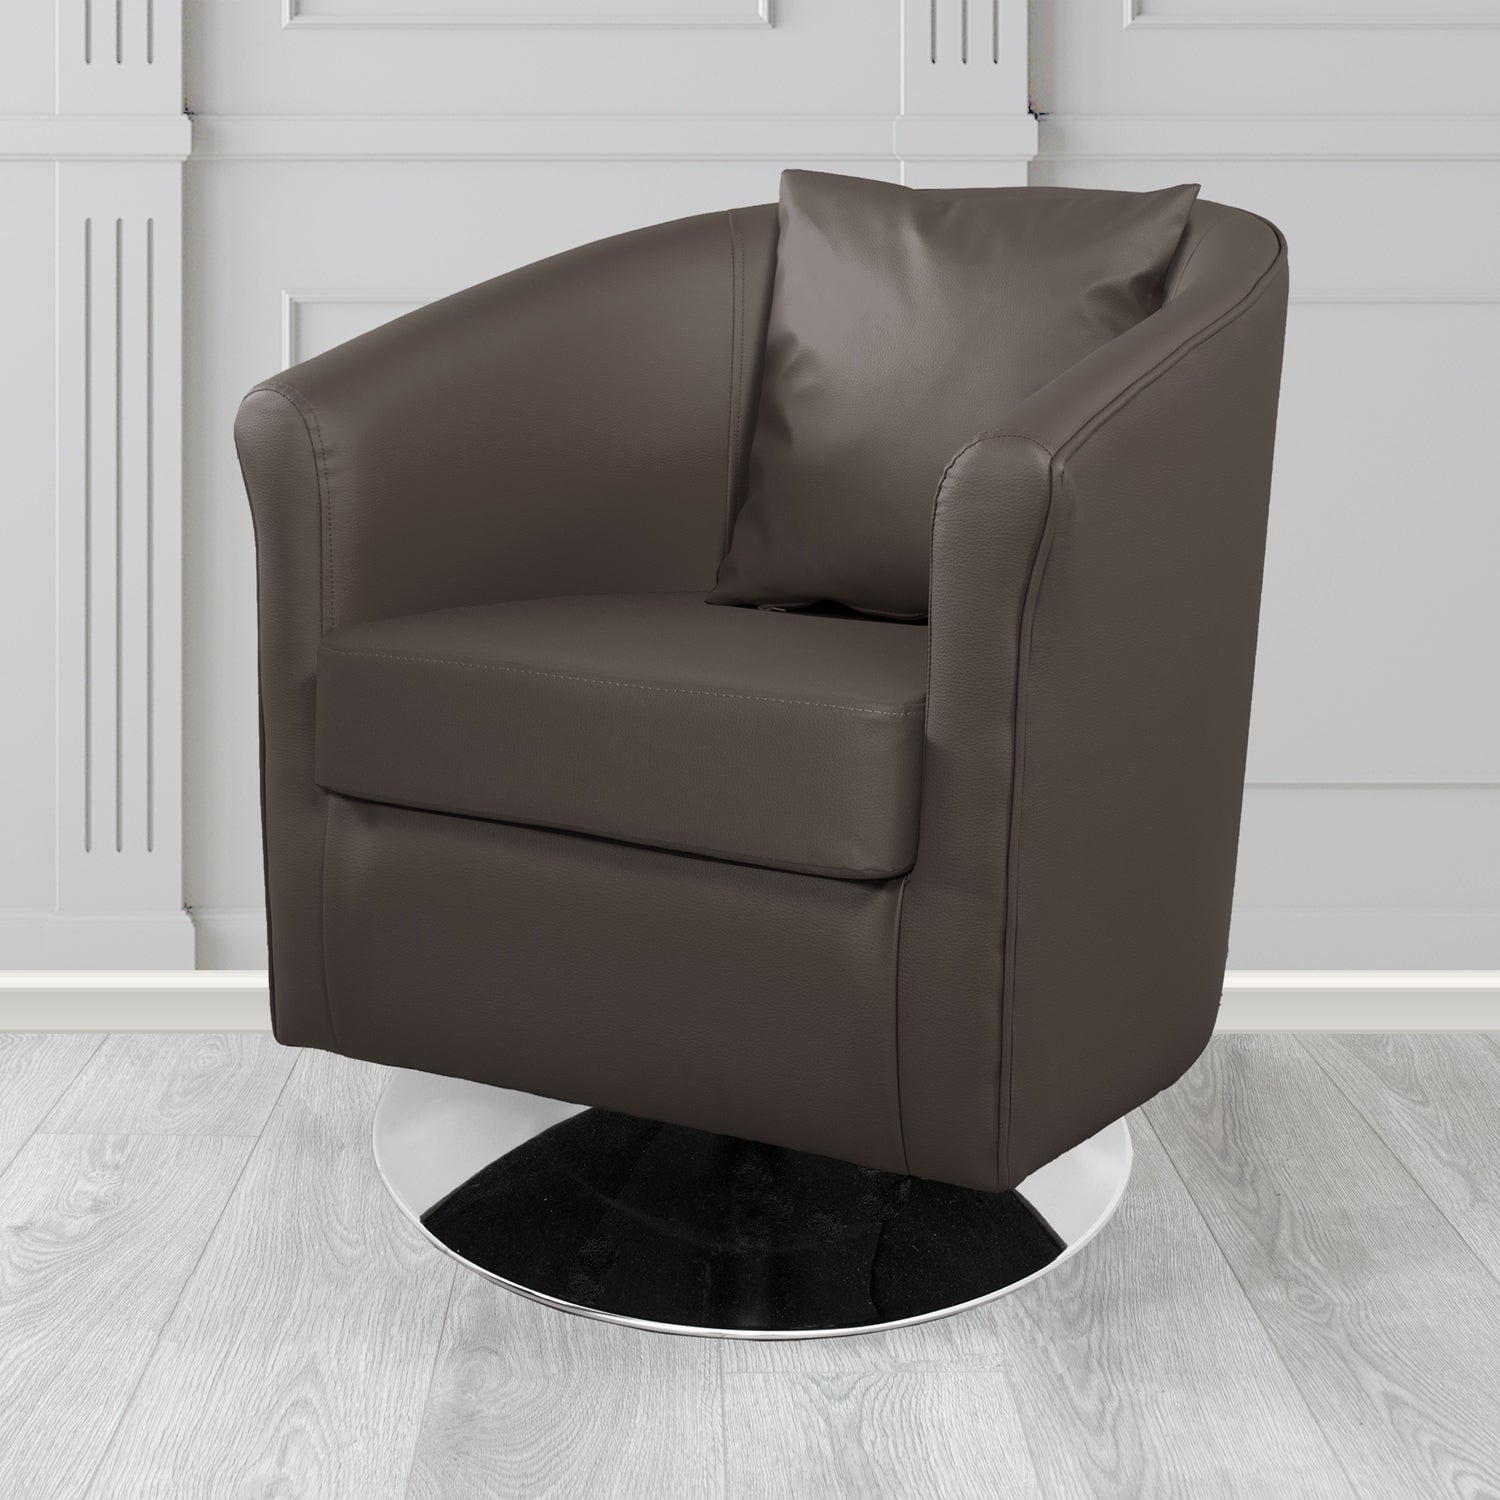 St Tropez Swivel Tub Chair with Scatter Cushion in Madrid Chocolate Faux Leather - The Tub Chair Shop